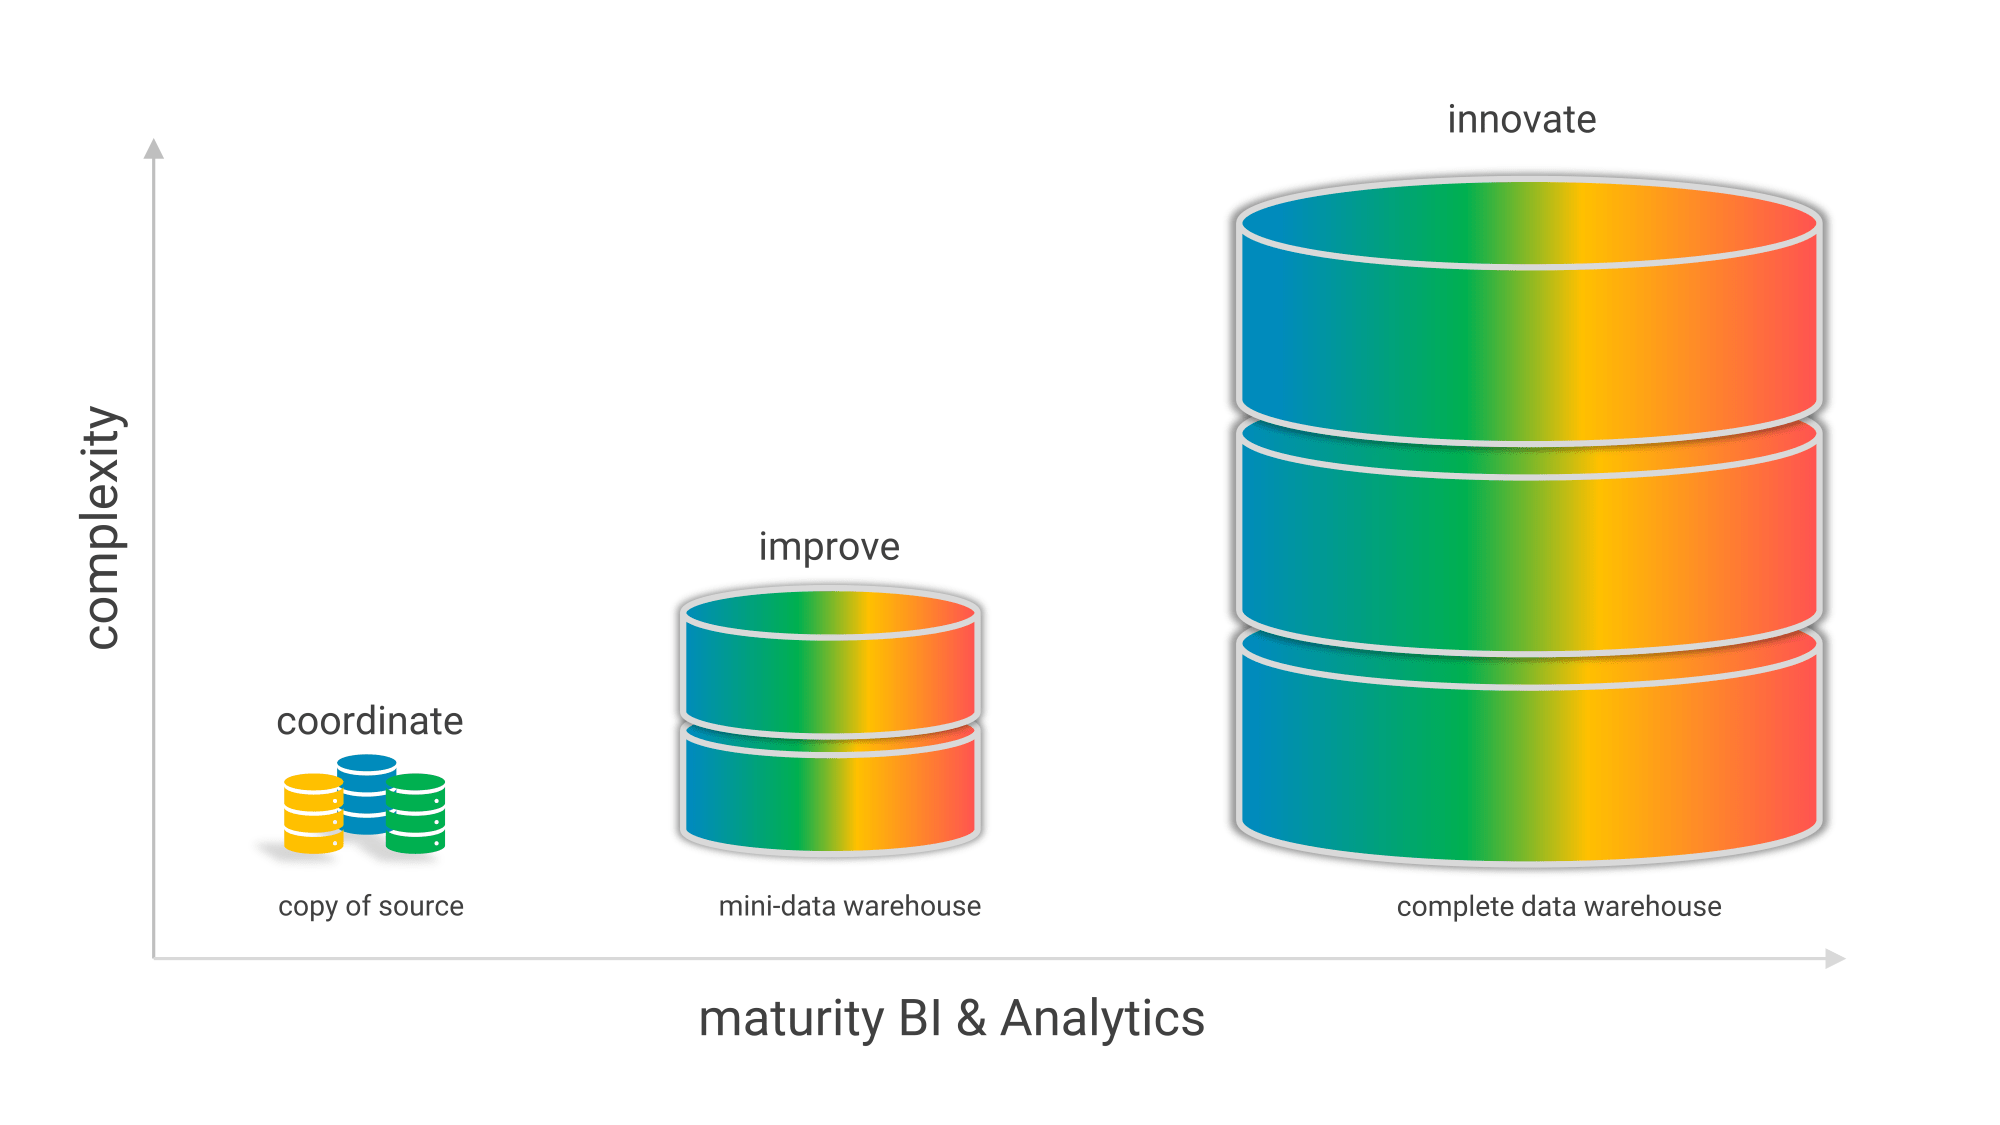 Data warehouse significance grows with the maturity of BI